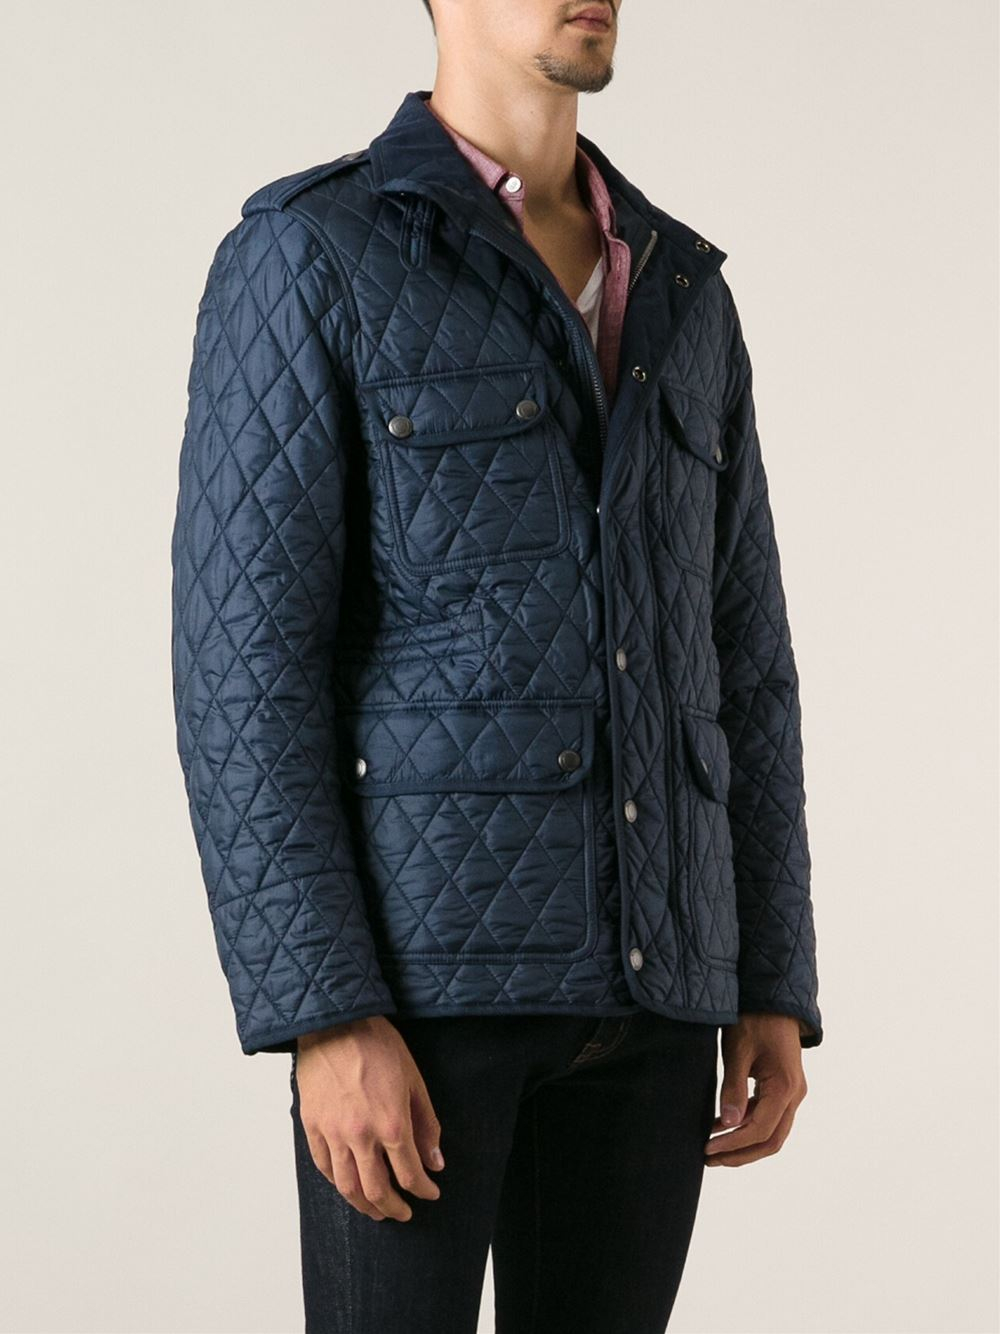 Lyst - Burberry Brit Diamond Quilted Field Jacket in Blue for Men